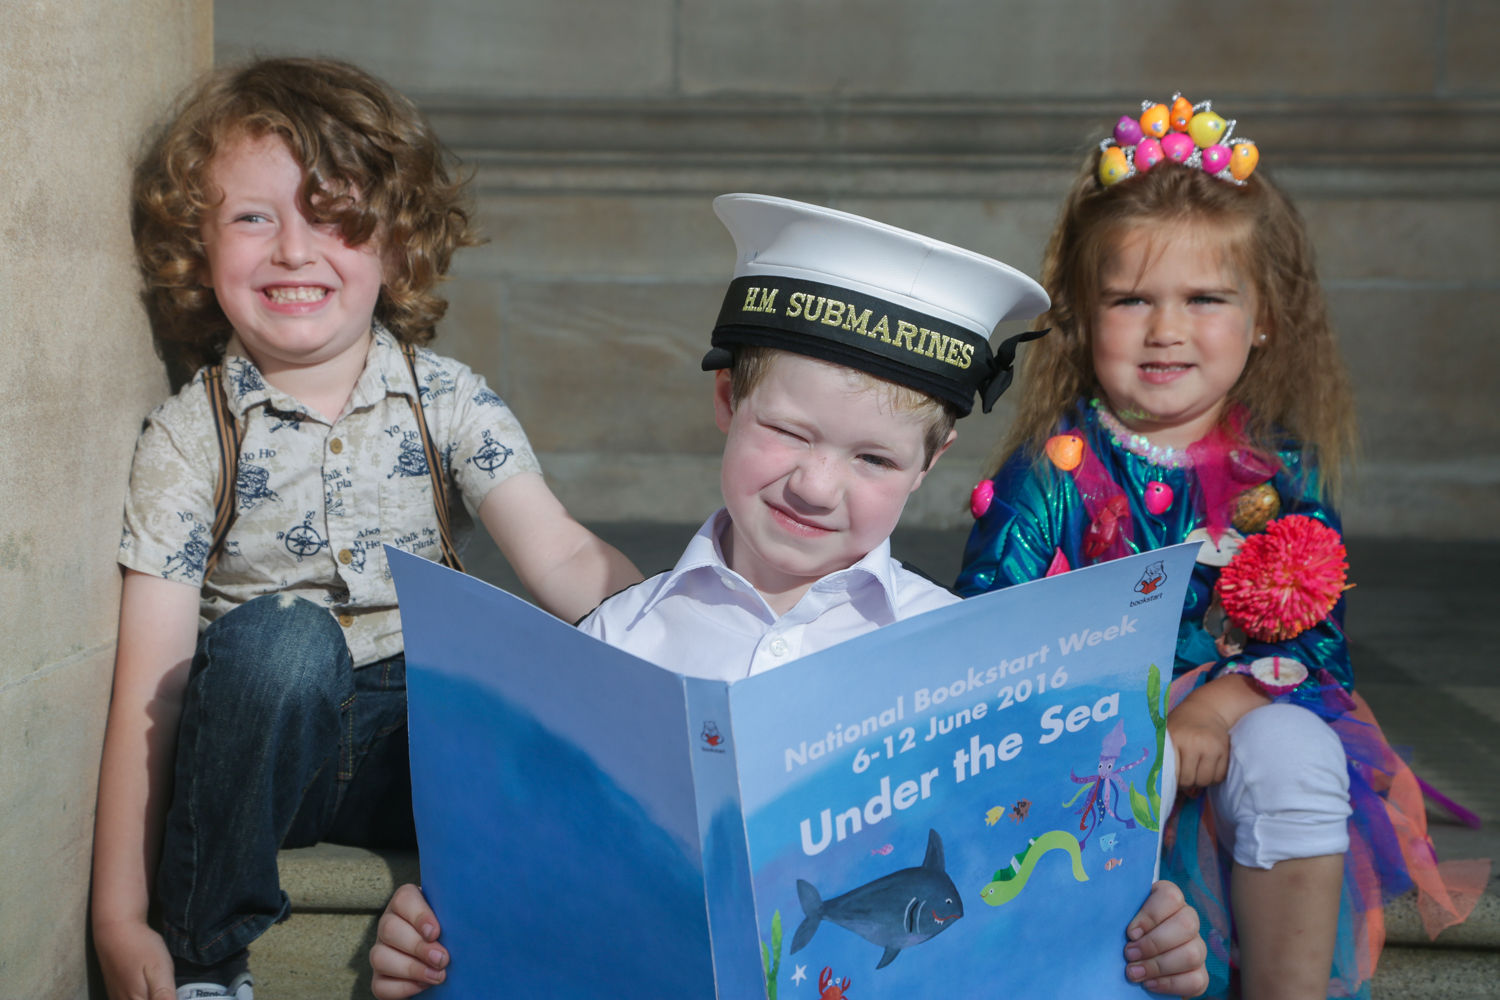 Youngsters Have a Whale of a Time Celebrating National Bookstart Week